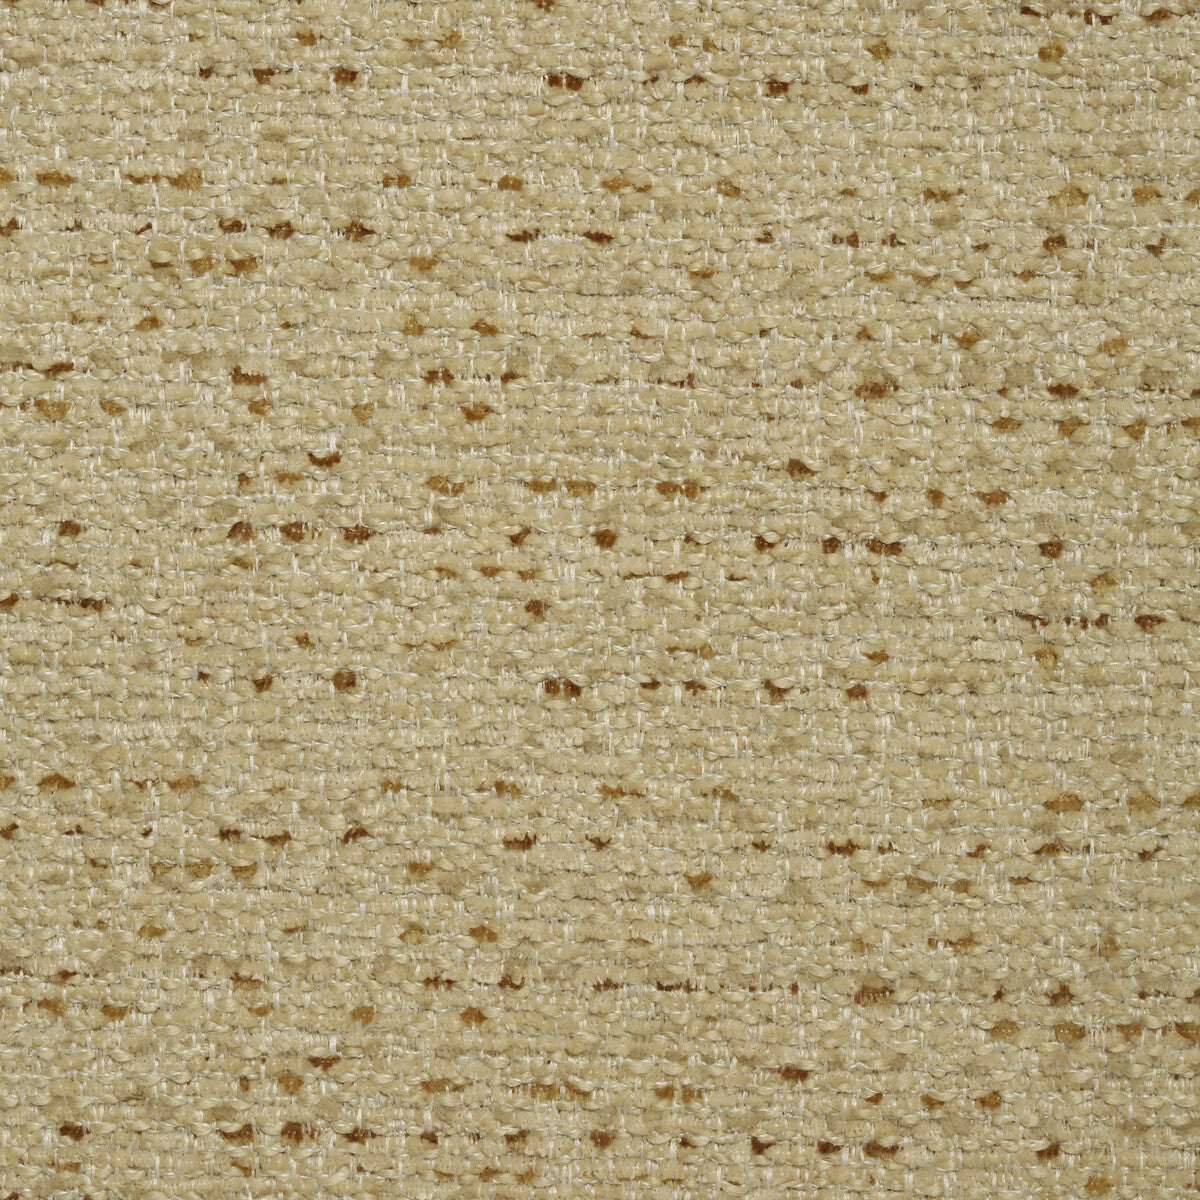 Kravet Smart fabric in 35117-116 color - pattern 35117.116.0 - by Kravet Smart in the Performance Crypton Home collection